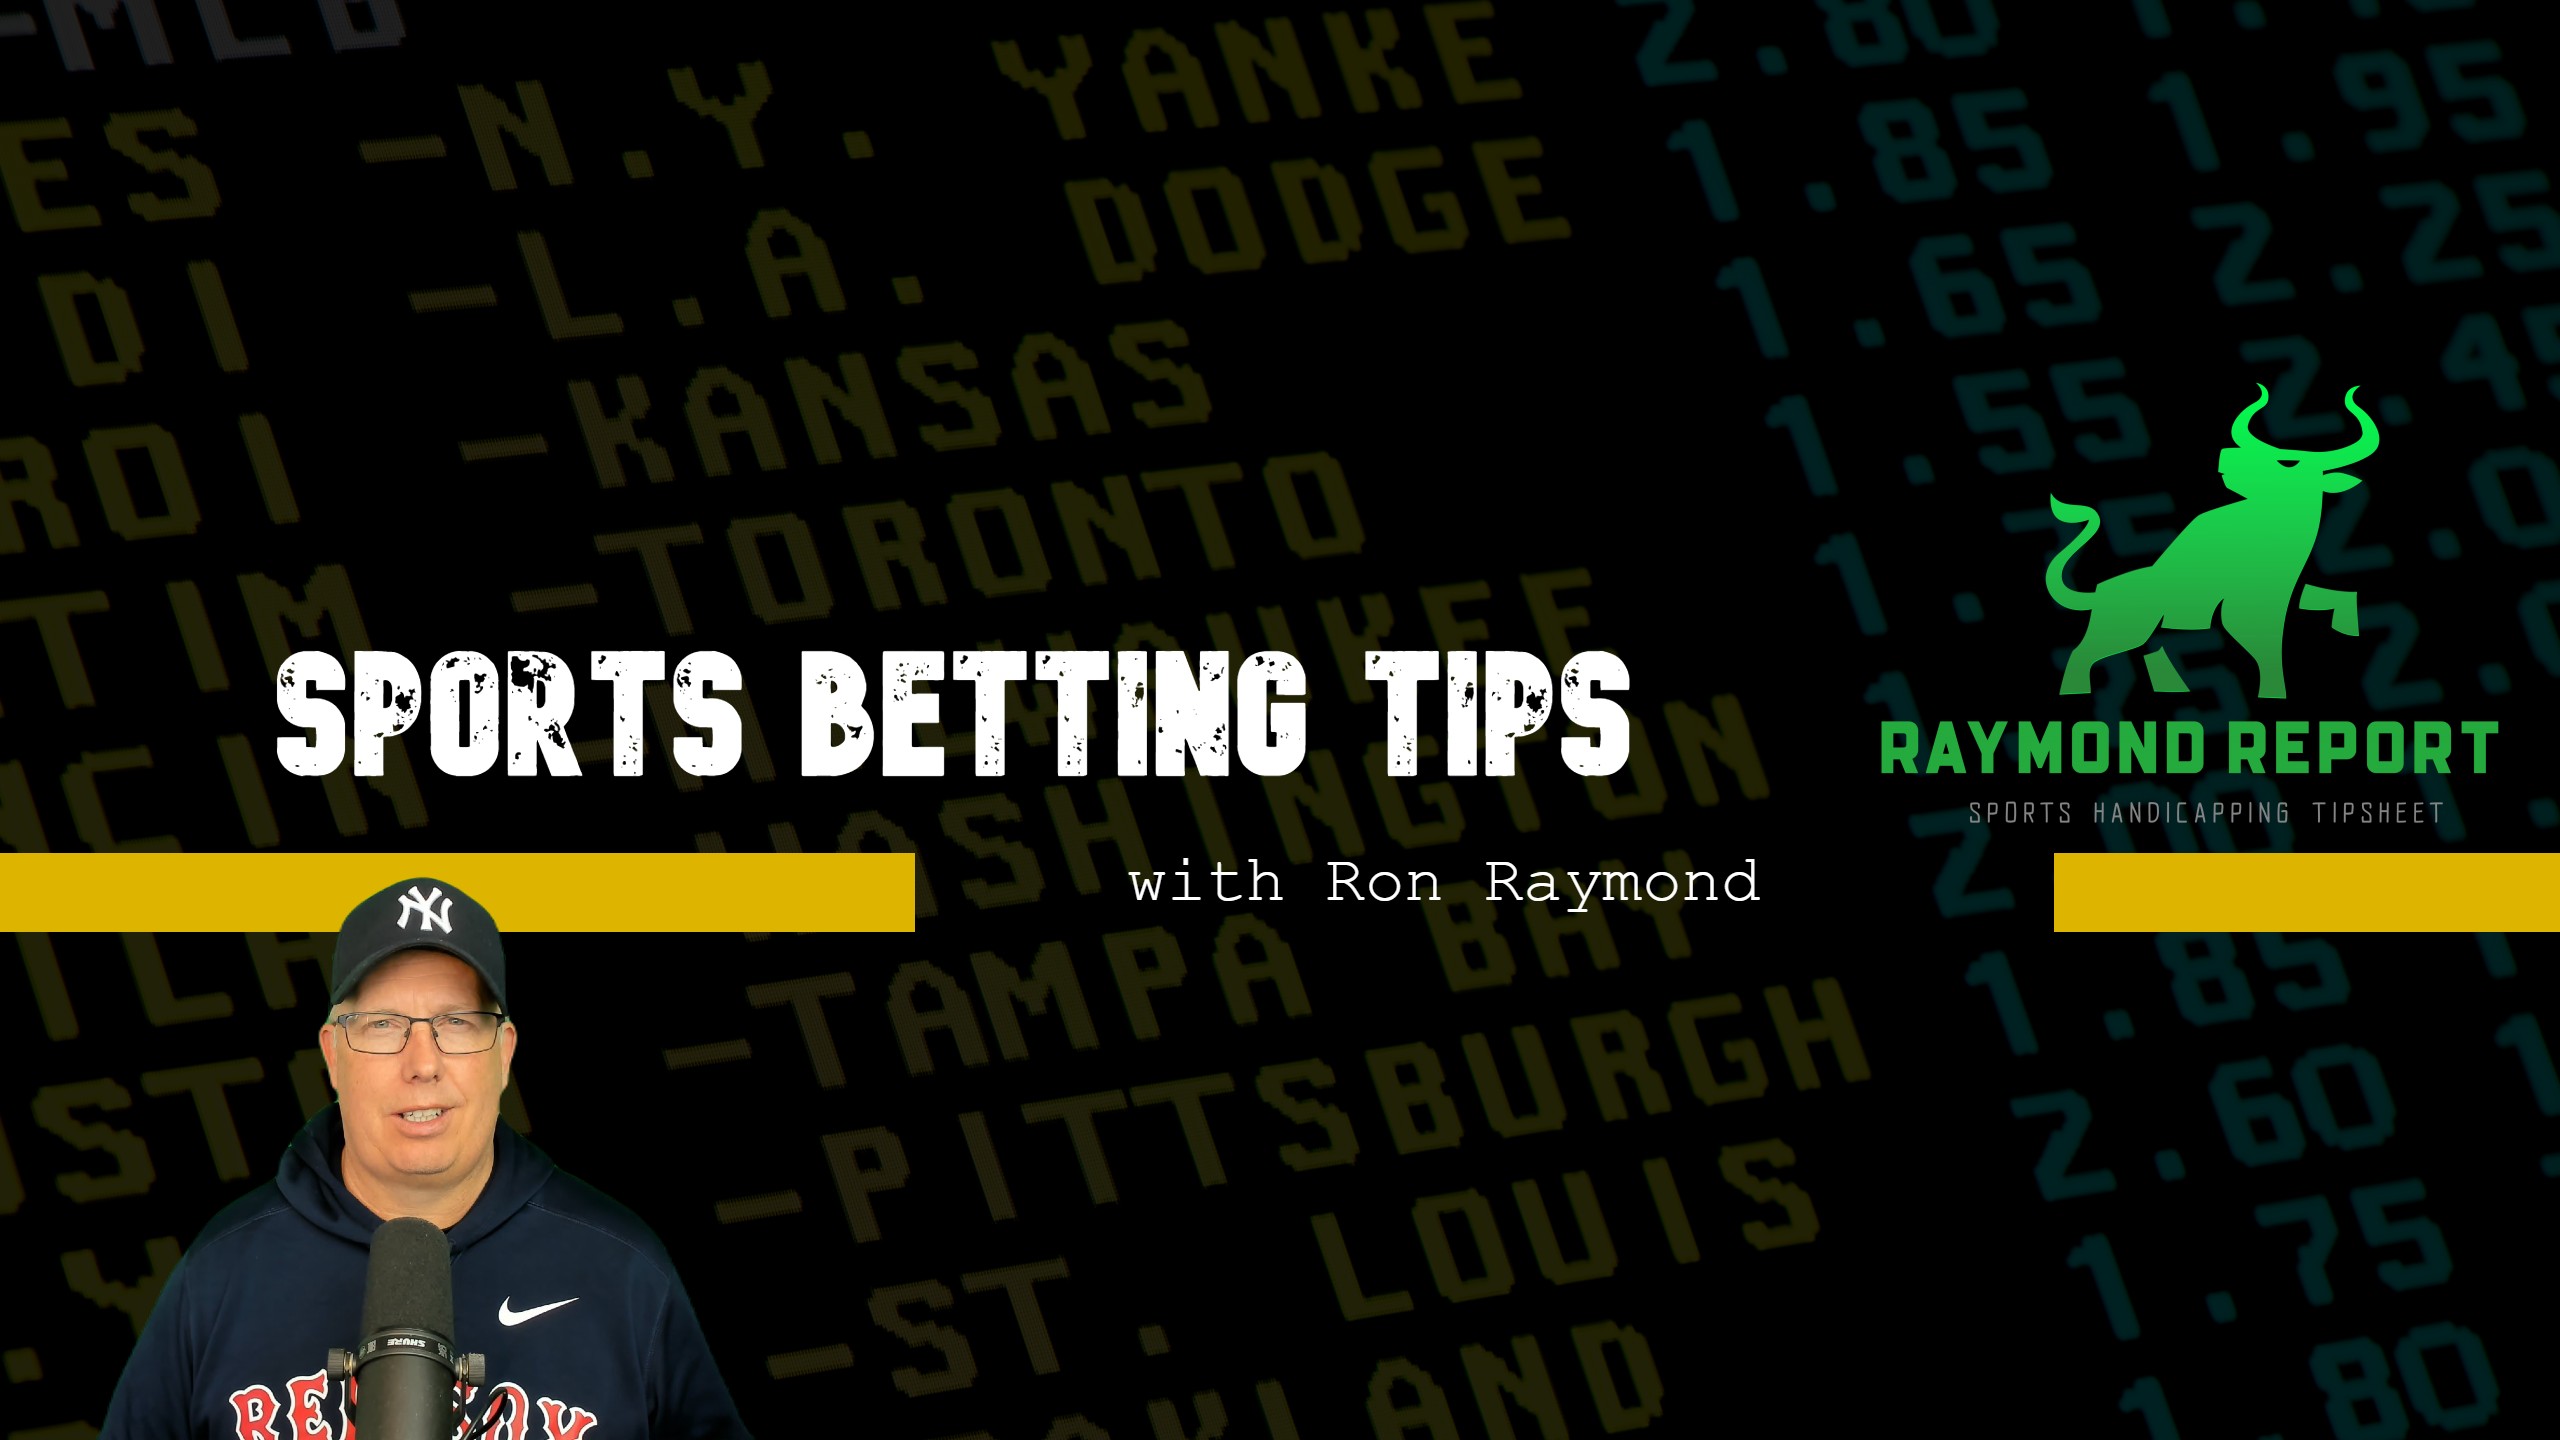 Ron Raymond’s Top 10 Betting Tips for Sports Bettors